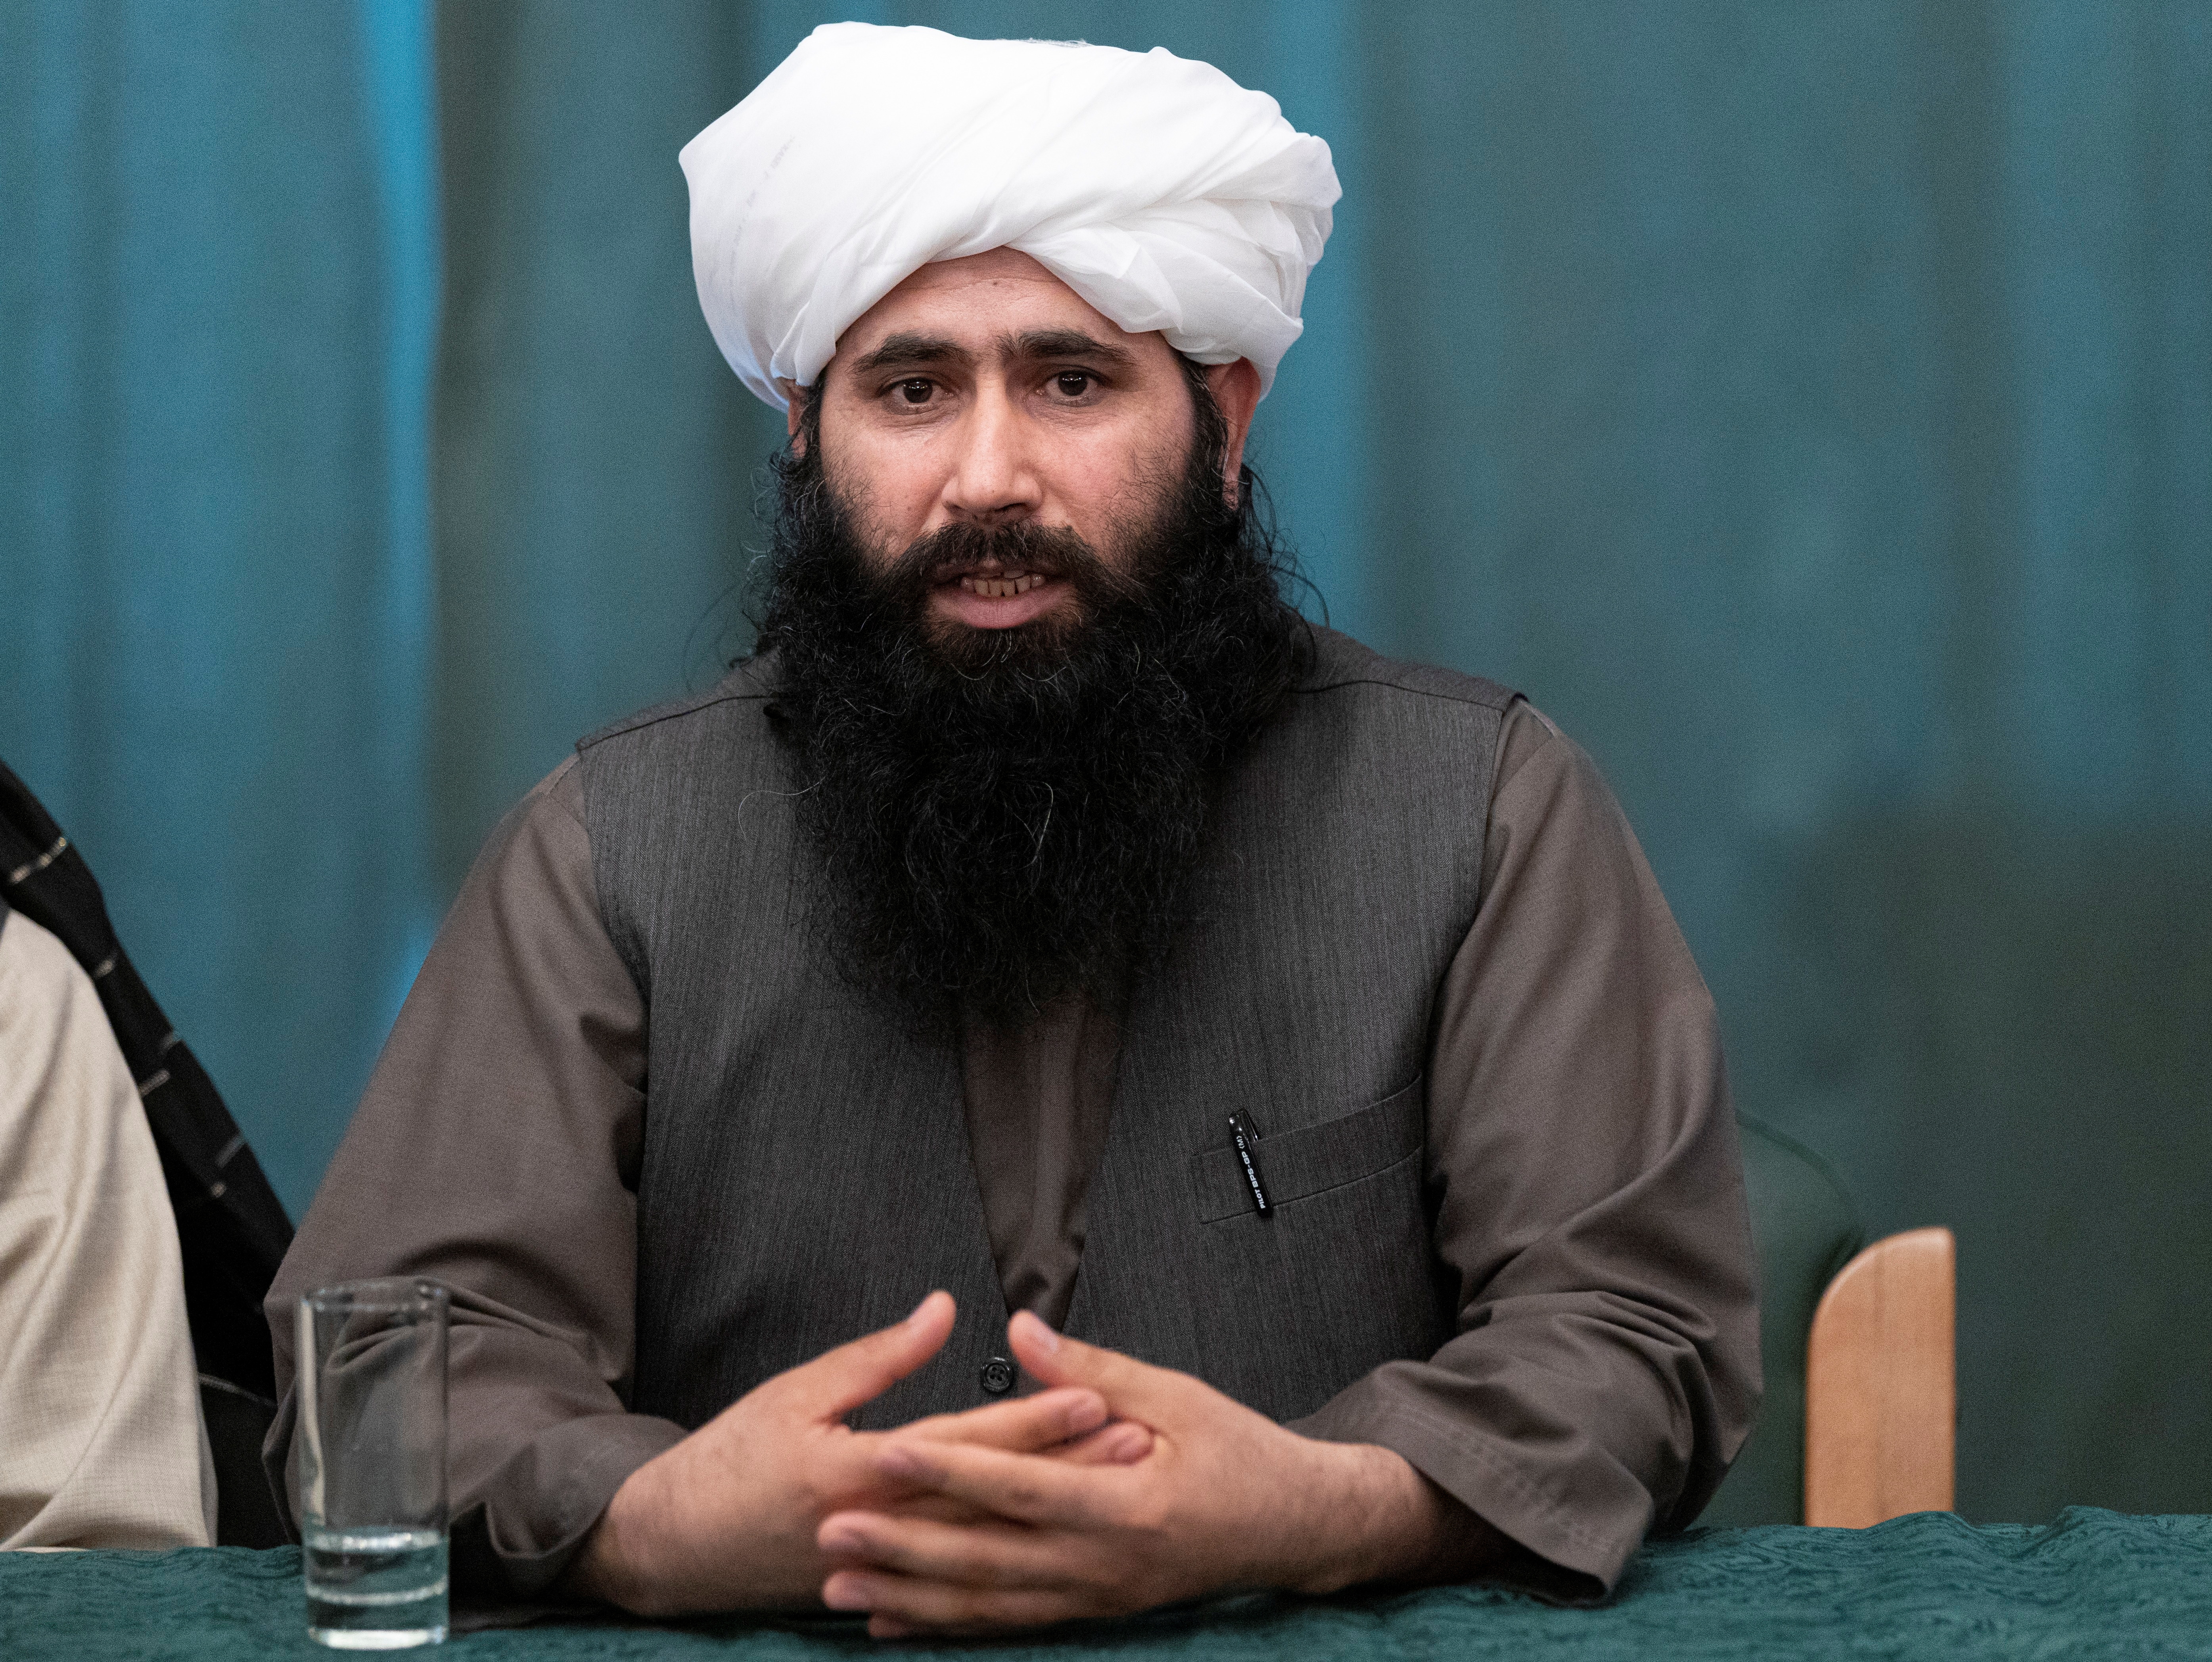 Mohammad Naeem, spokesman for the Taliban's political office, speaks during a joint news conference in Moscow, Russia March 19, 2021. Alexander Zemlianichenko/Pool via REUTERS